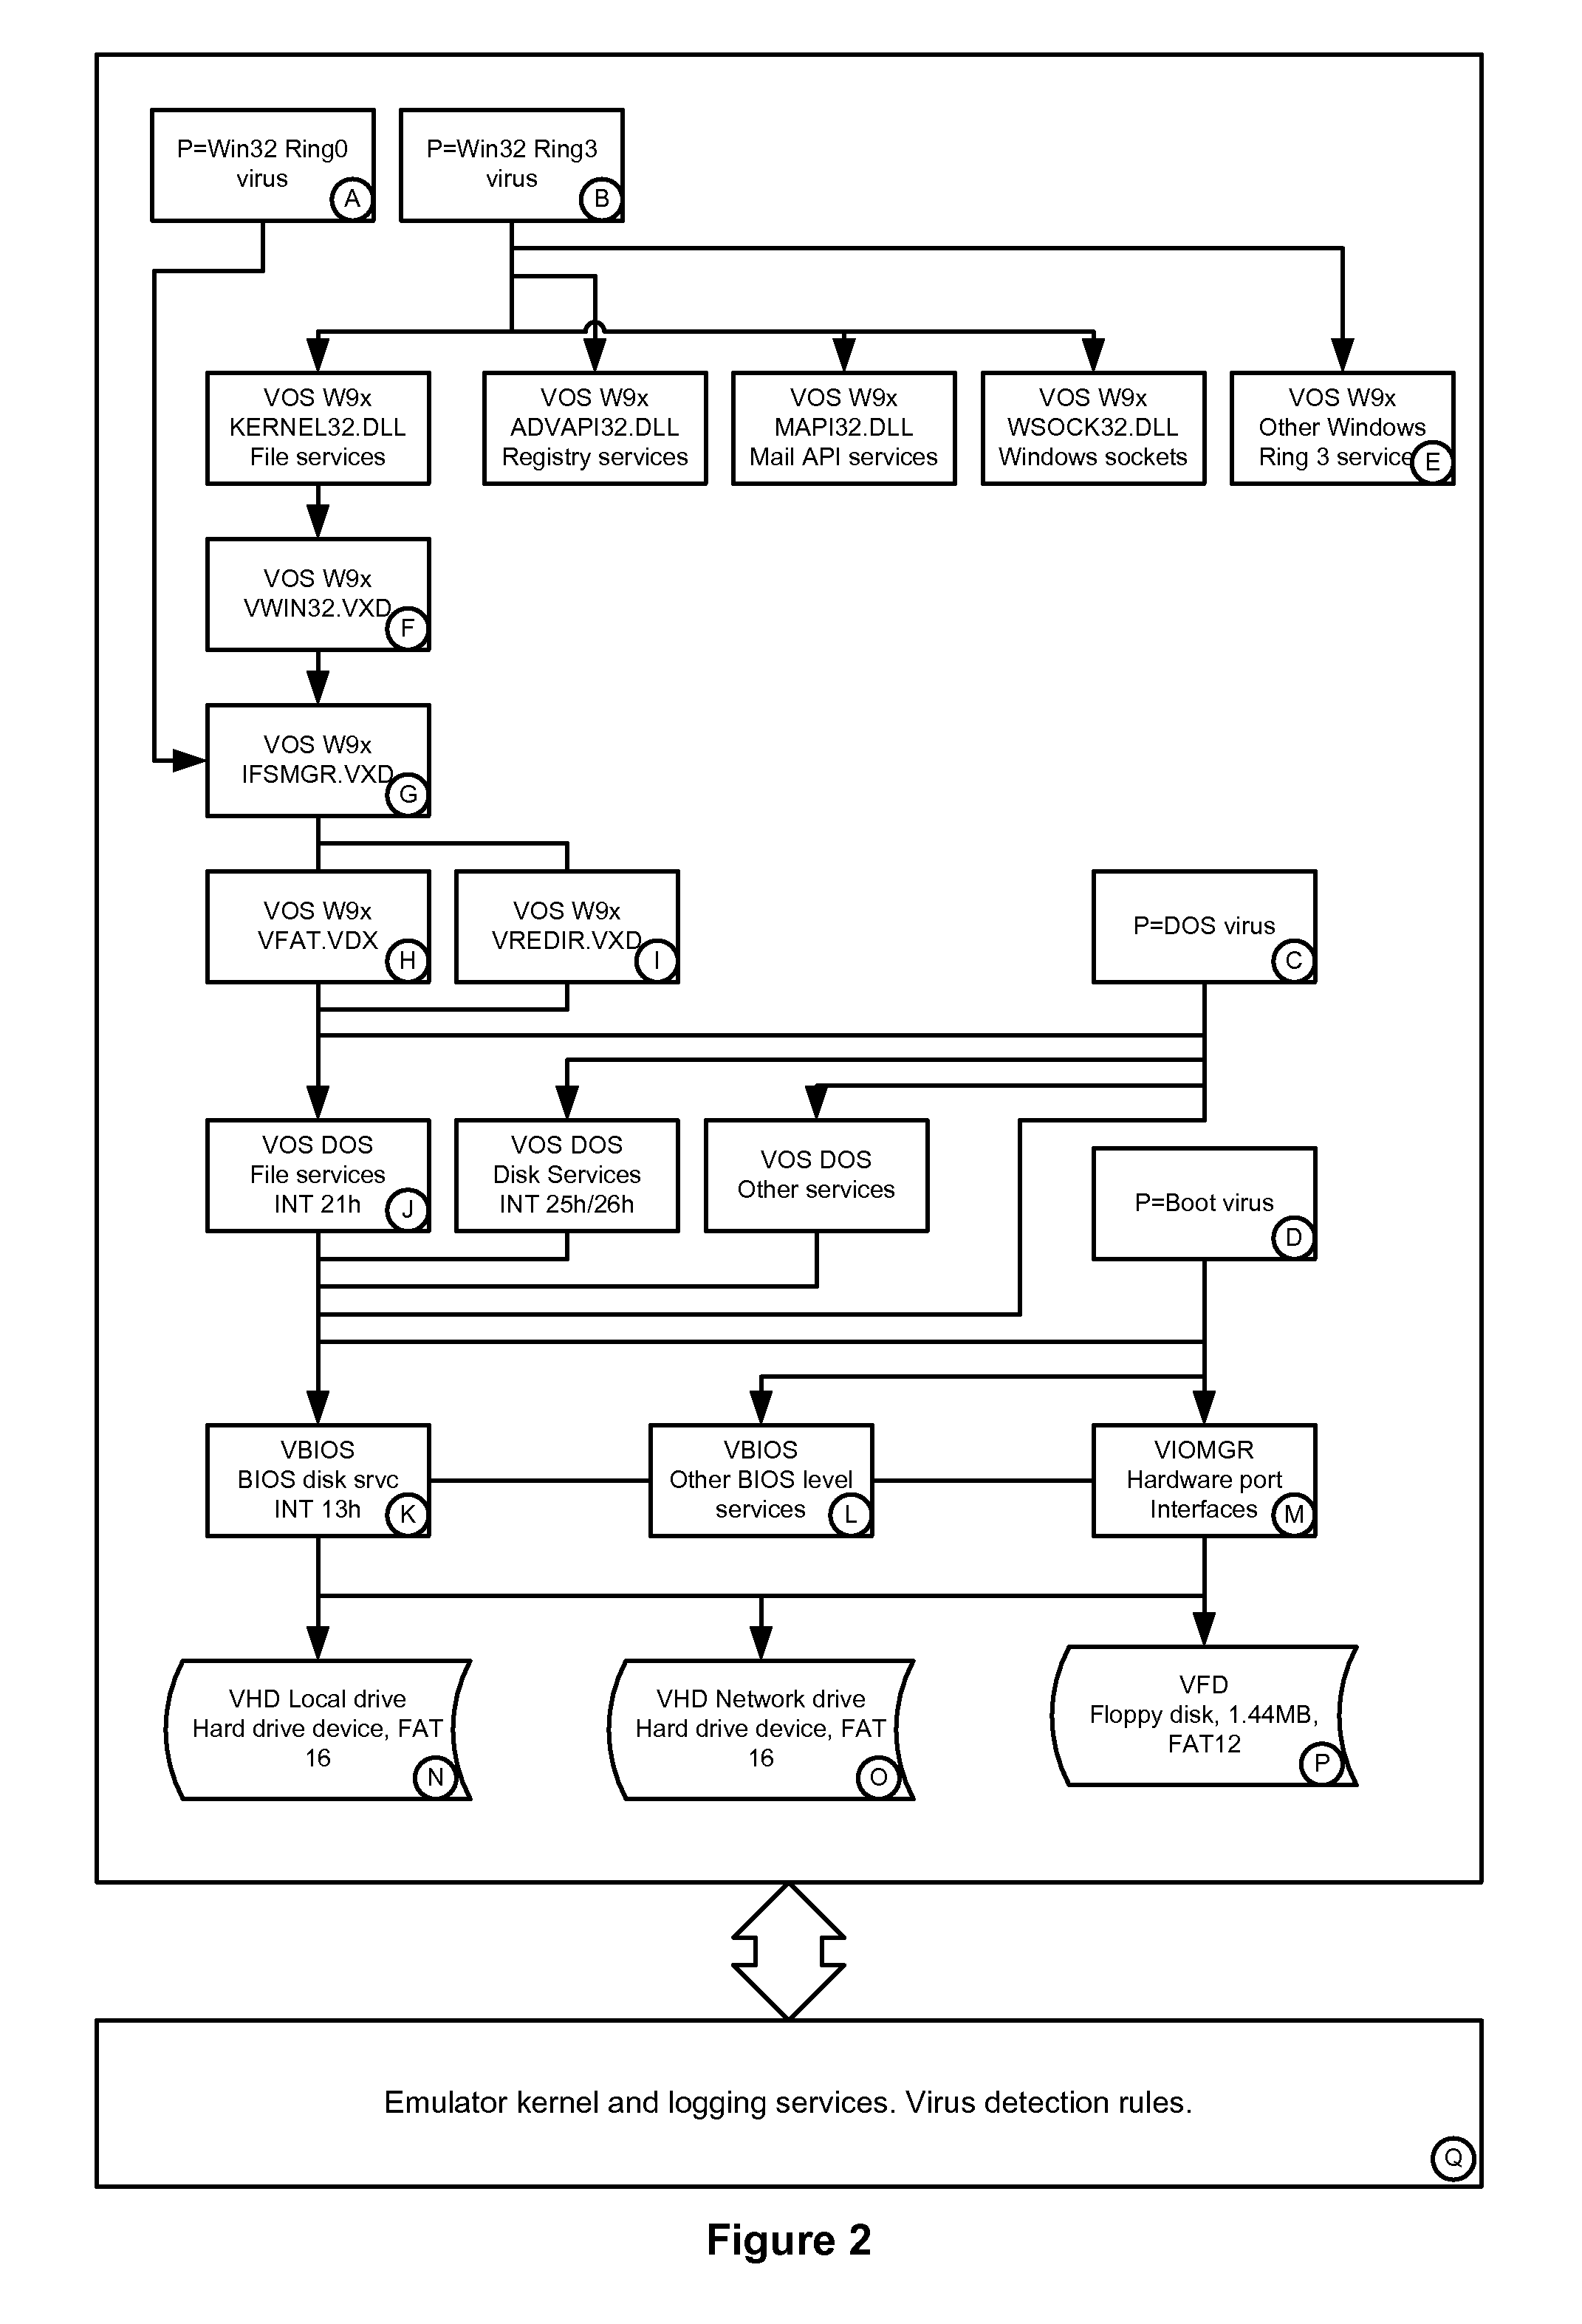 Simulated computer system for monitoring of software performance